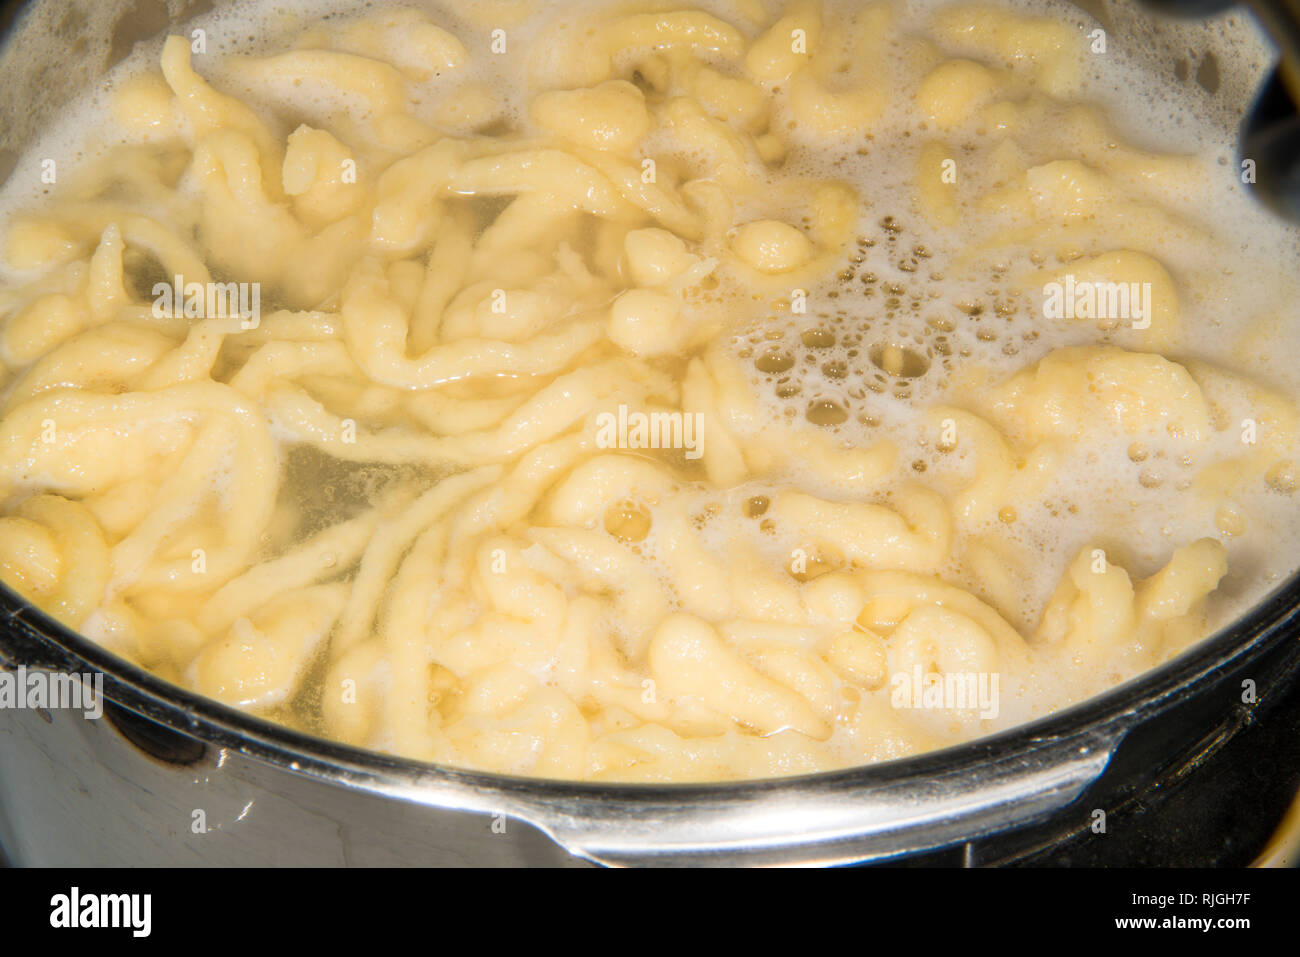 German noodles called Spaetzle cooking in a pot Stock Photo